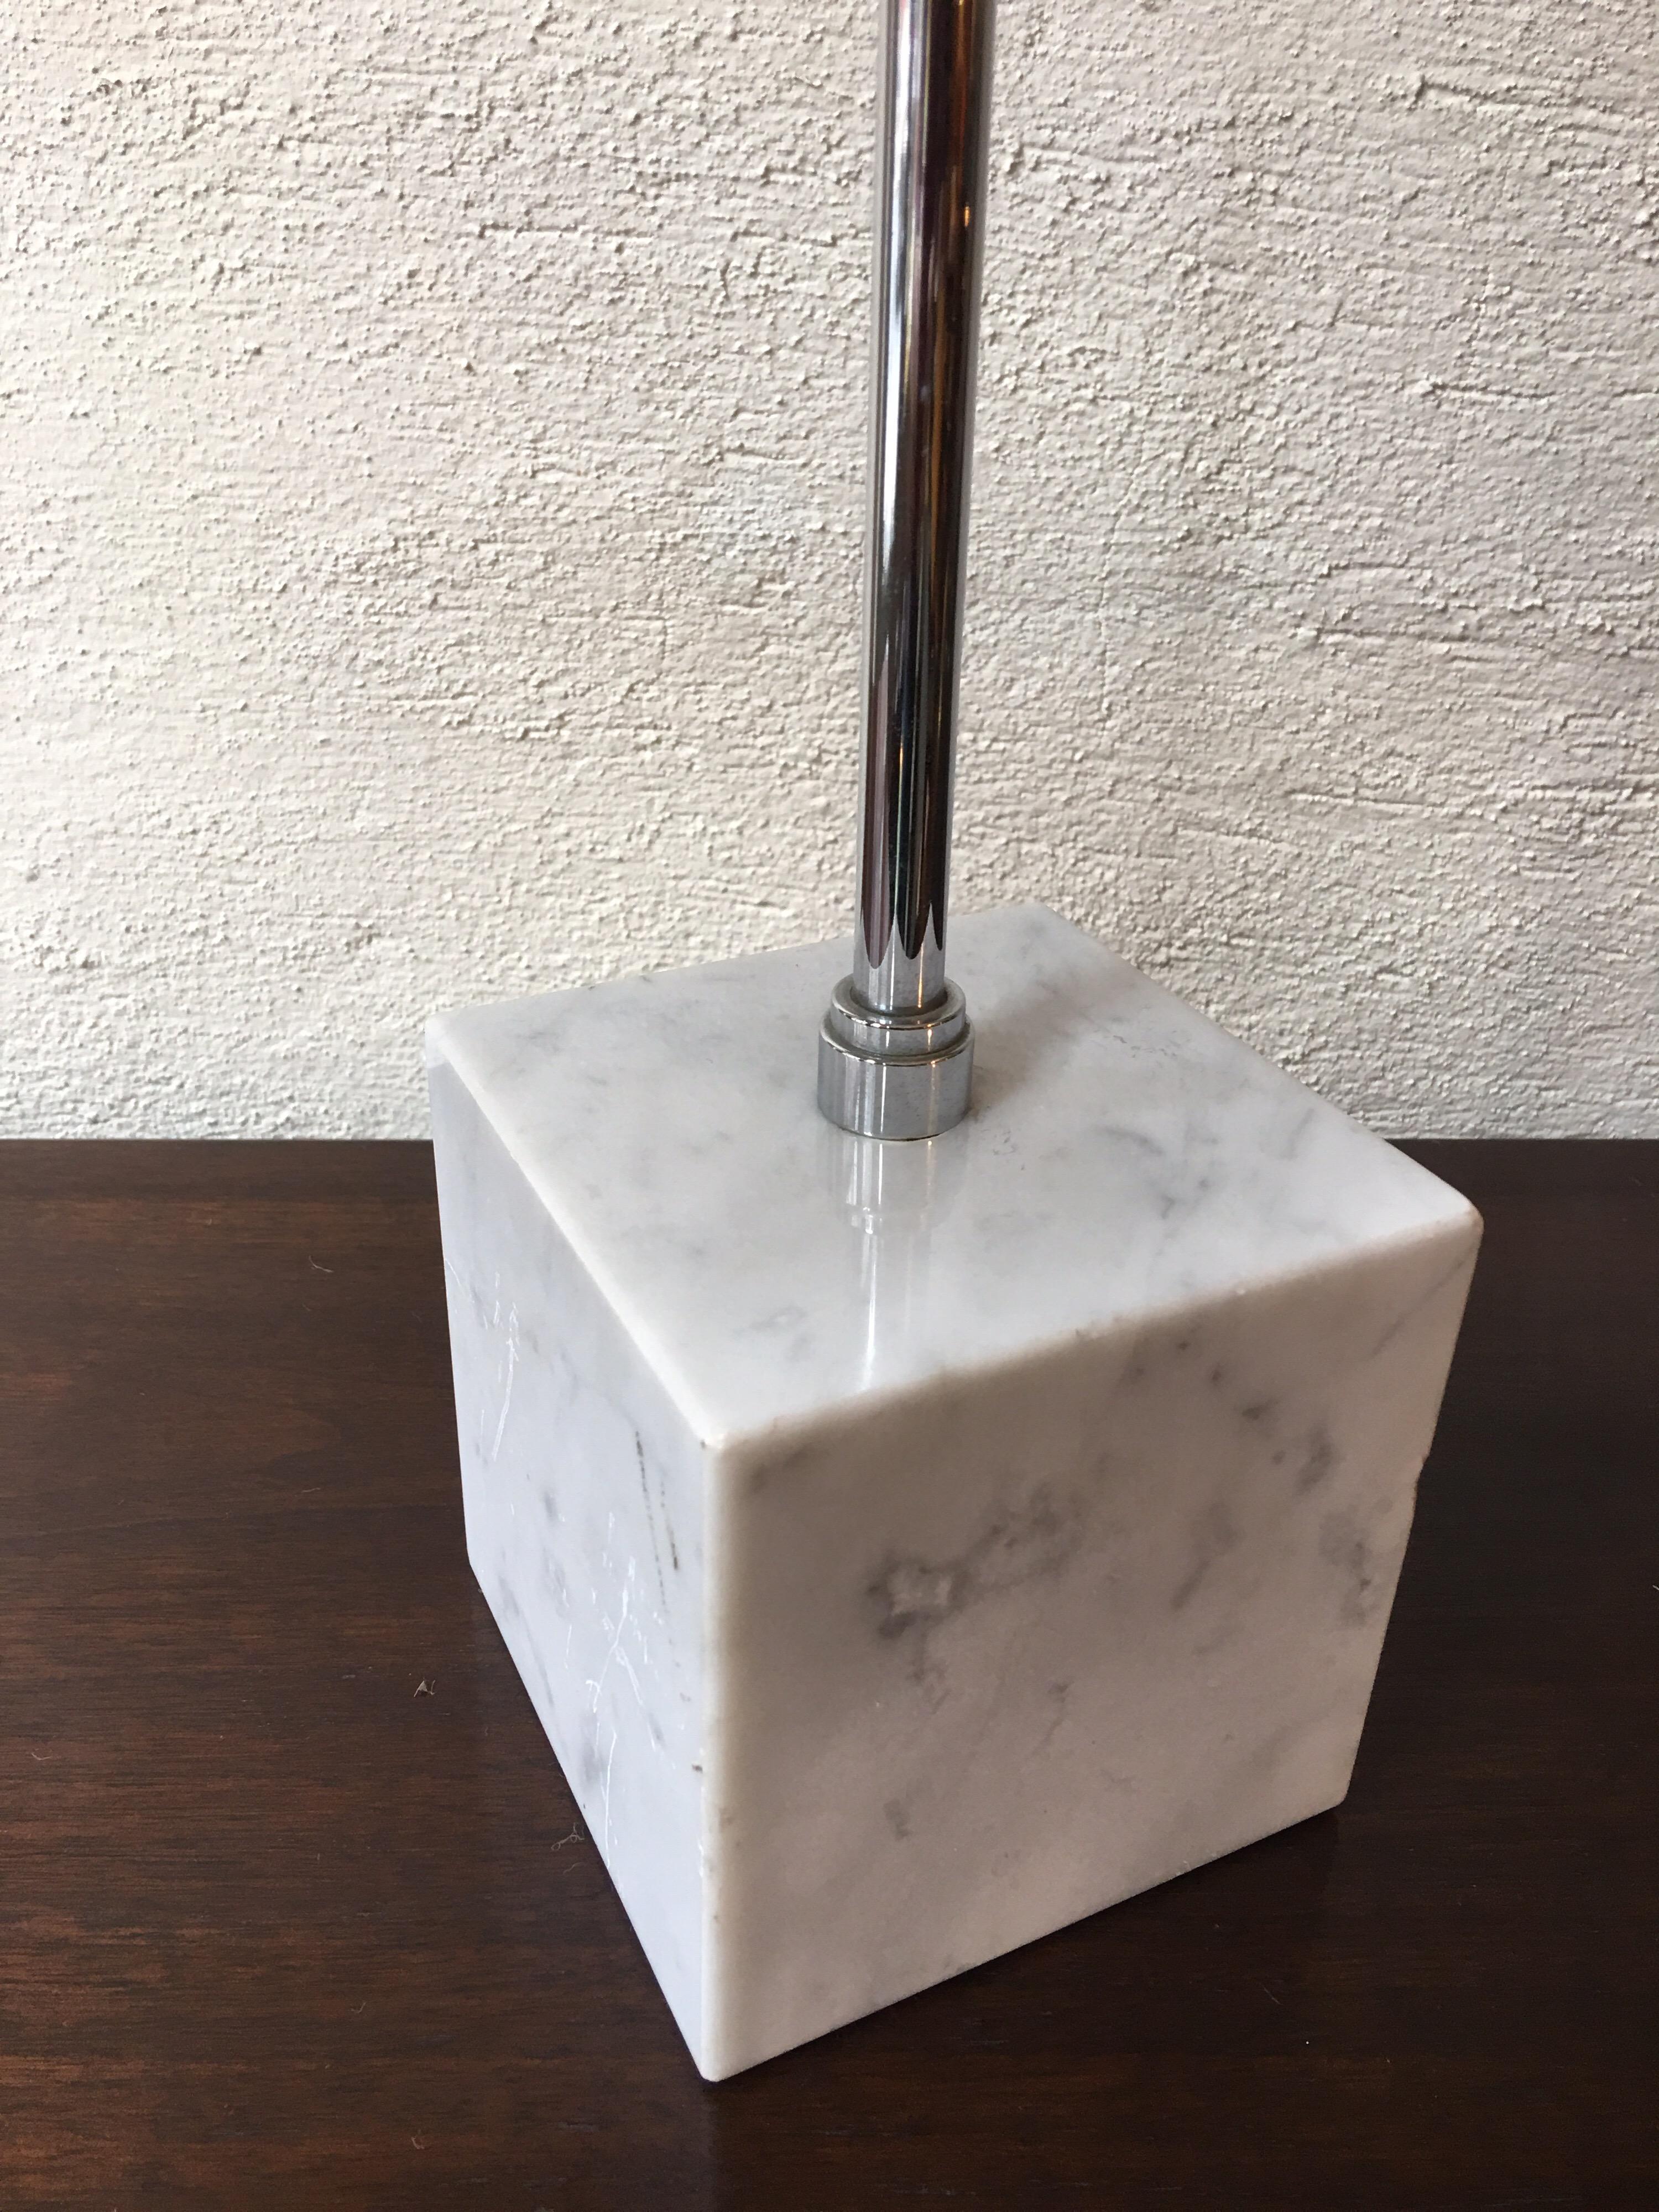 Koch & Lowy marble based table lamp. Chrome shade adjusts and moves in multiple ways. Switch dims.